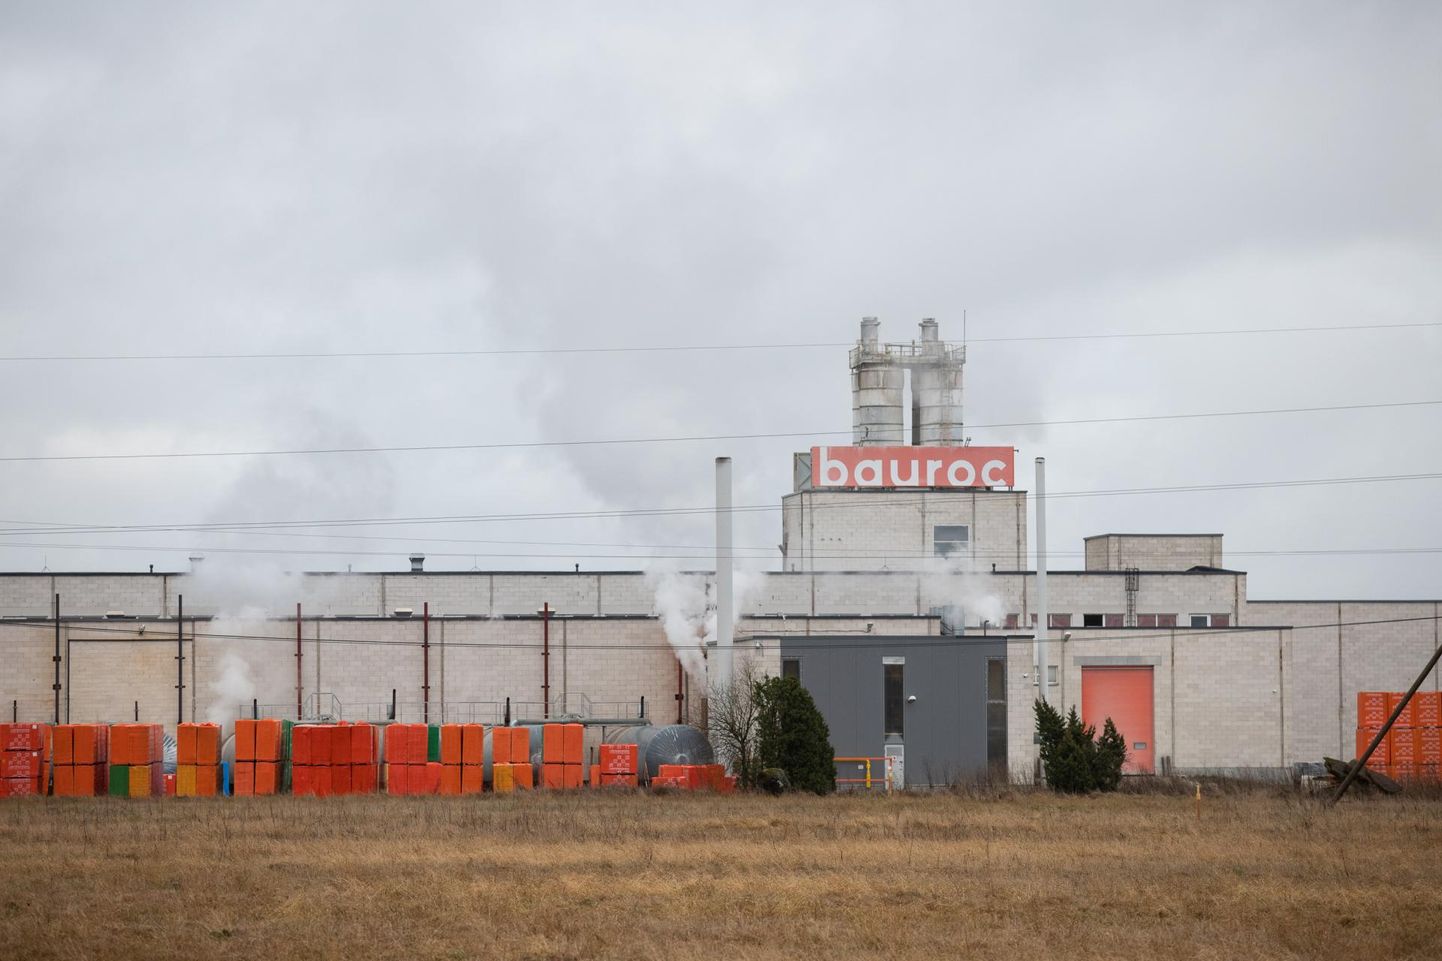 Bauroc, a manufacturer of building materials, plans to lay off twenty people.